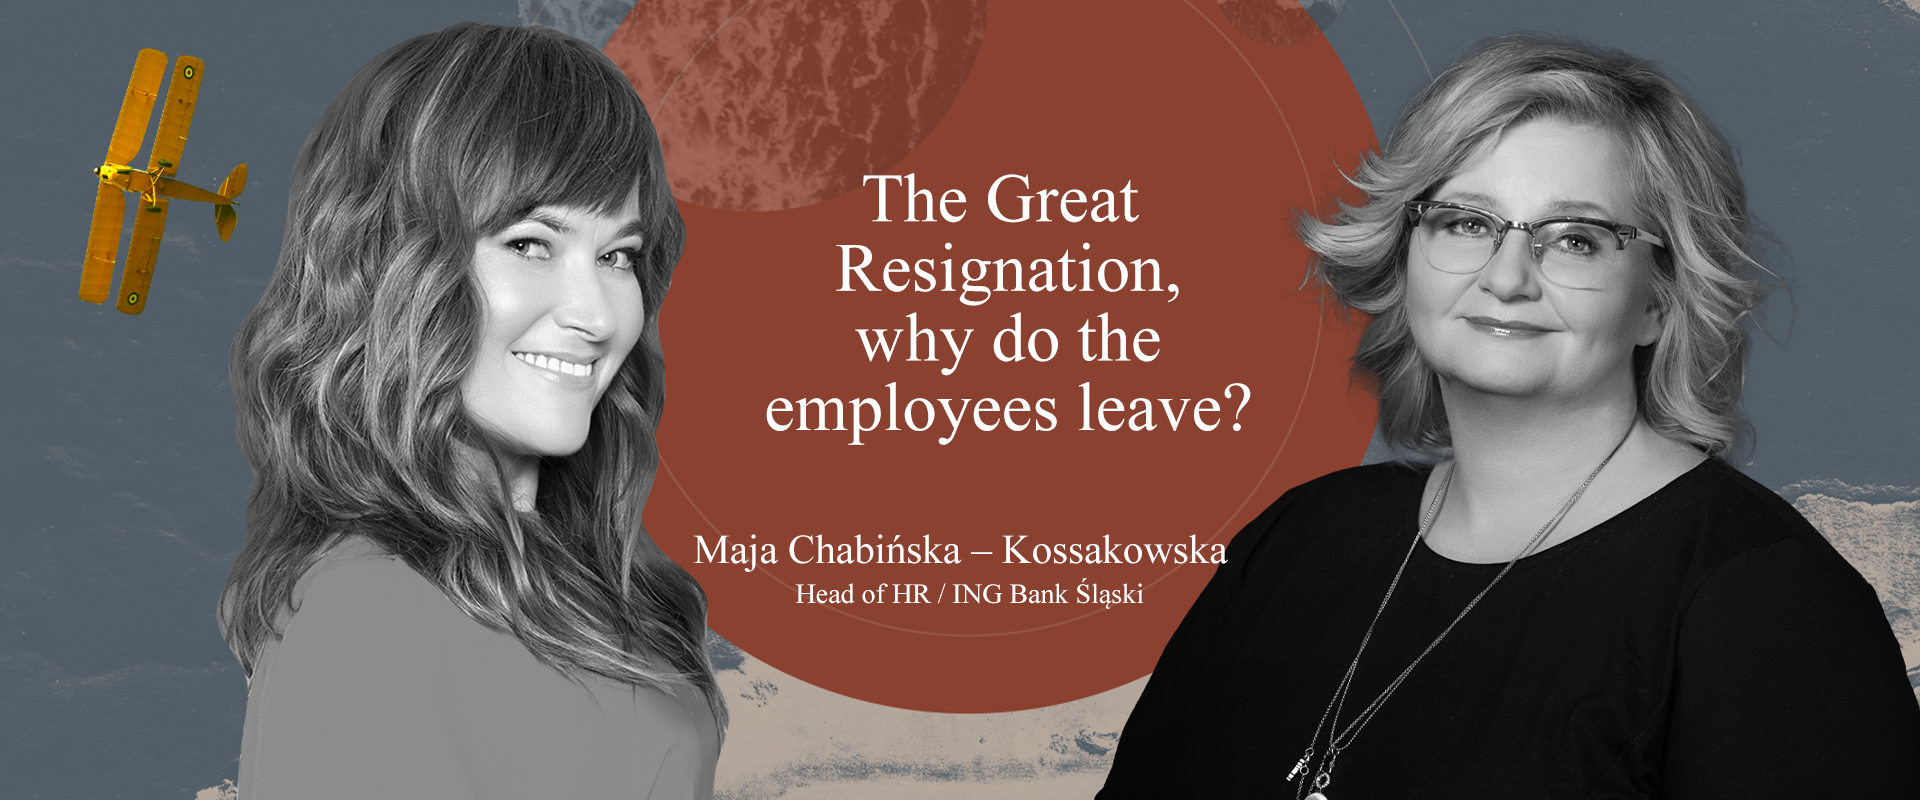 The Great Resignation – why do the employees leave?